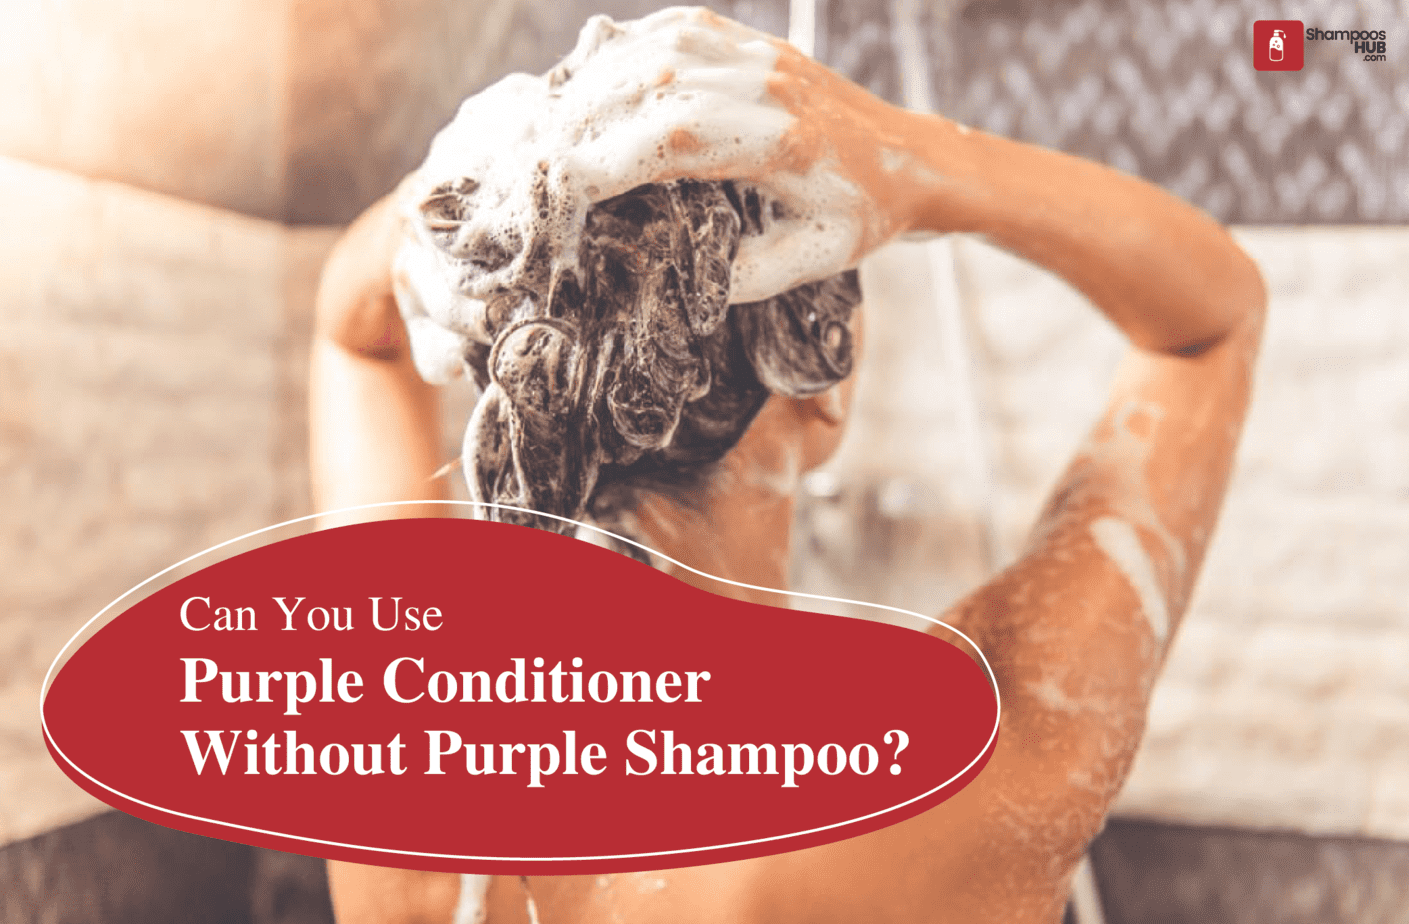 Can You Use Purple Conditioner Without Purple Shampoo?